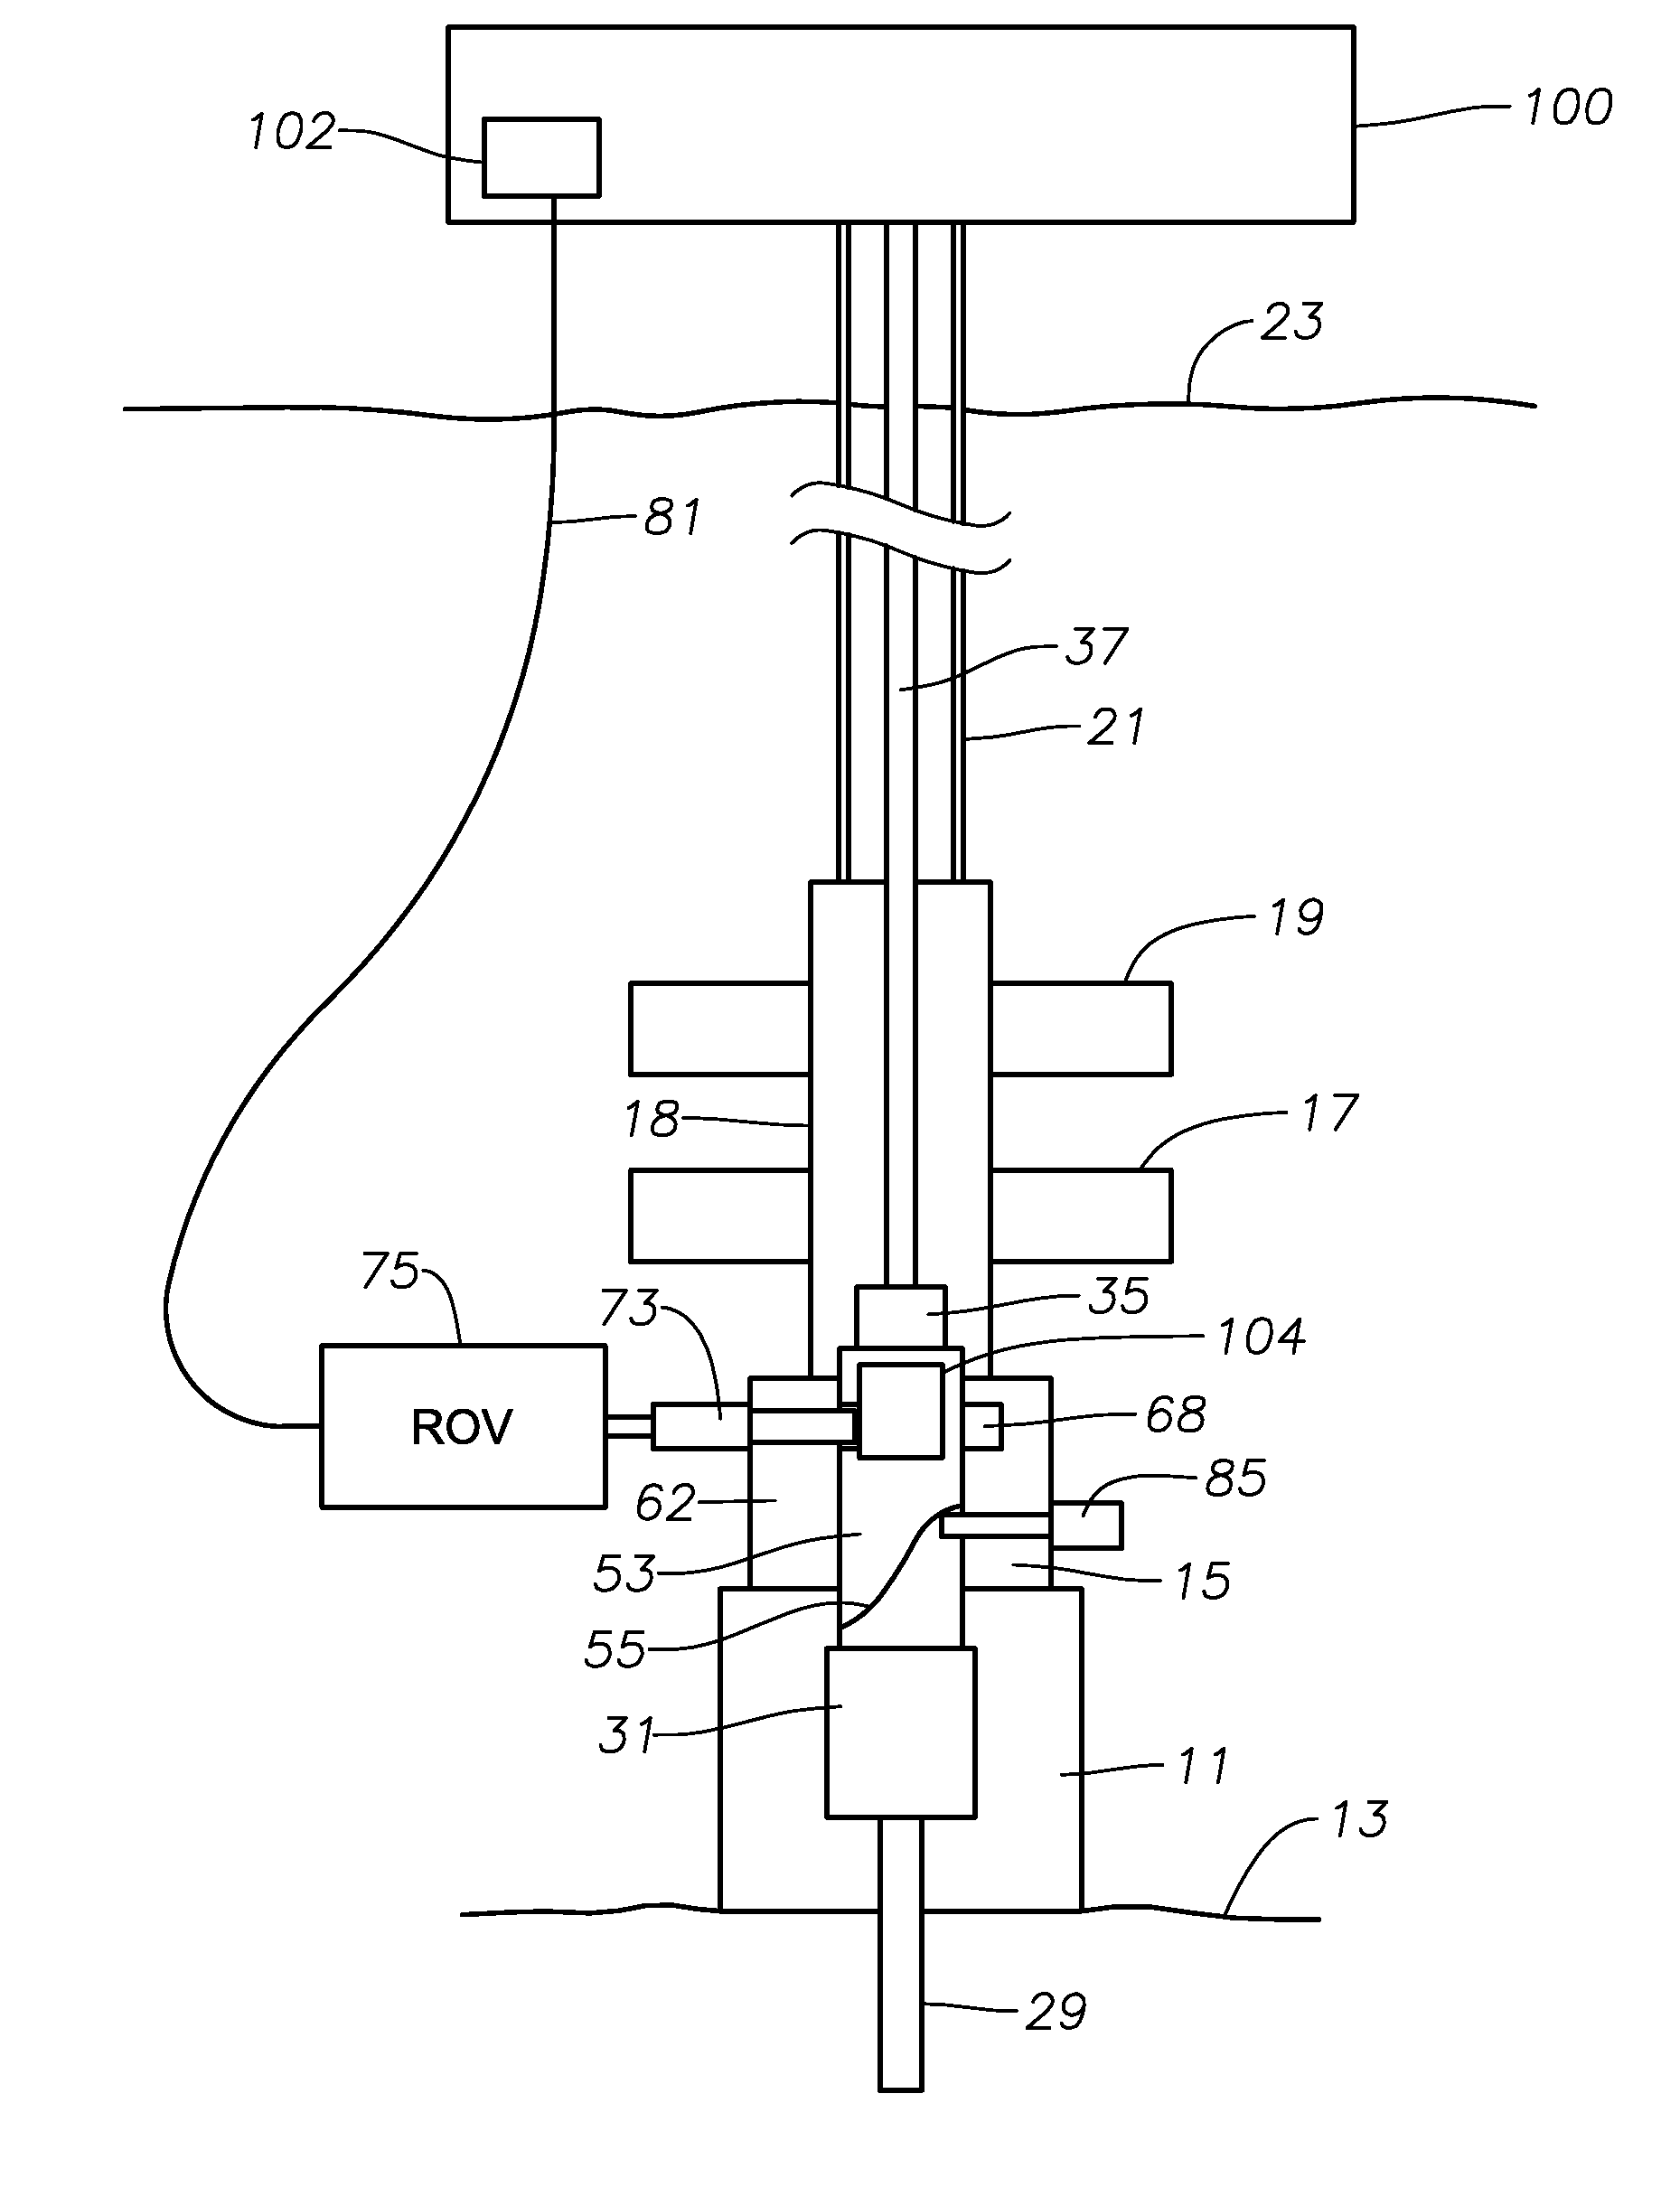 System and Method for Inductive Signal and Power Transfer from ROV to In Riser Tools